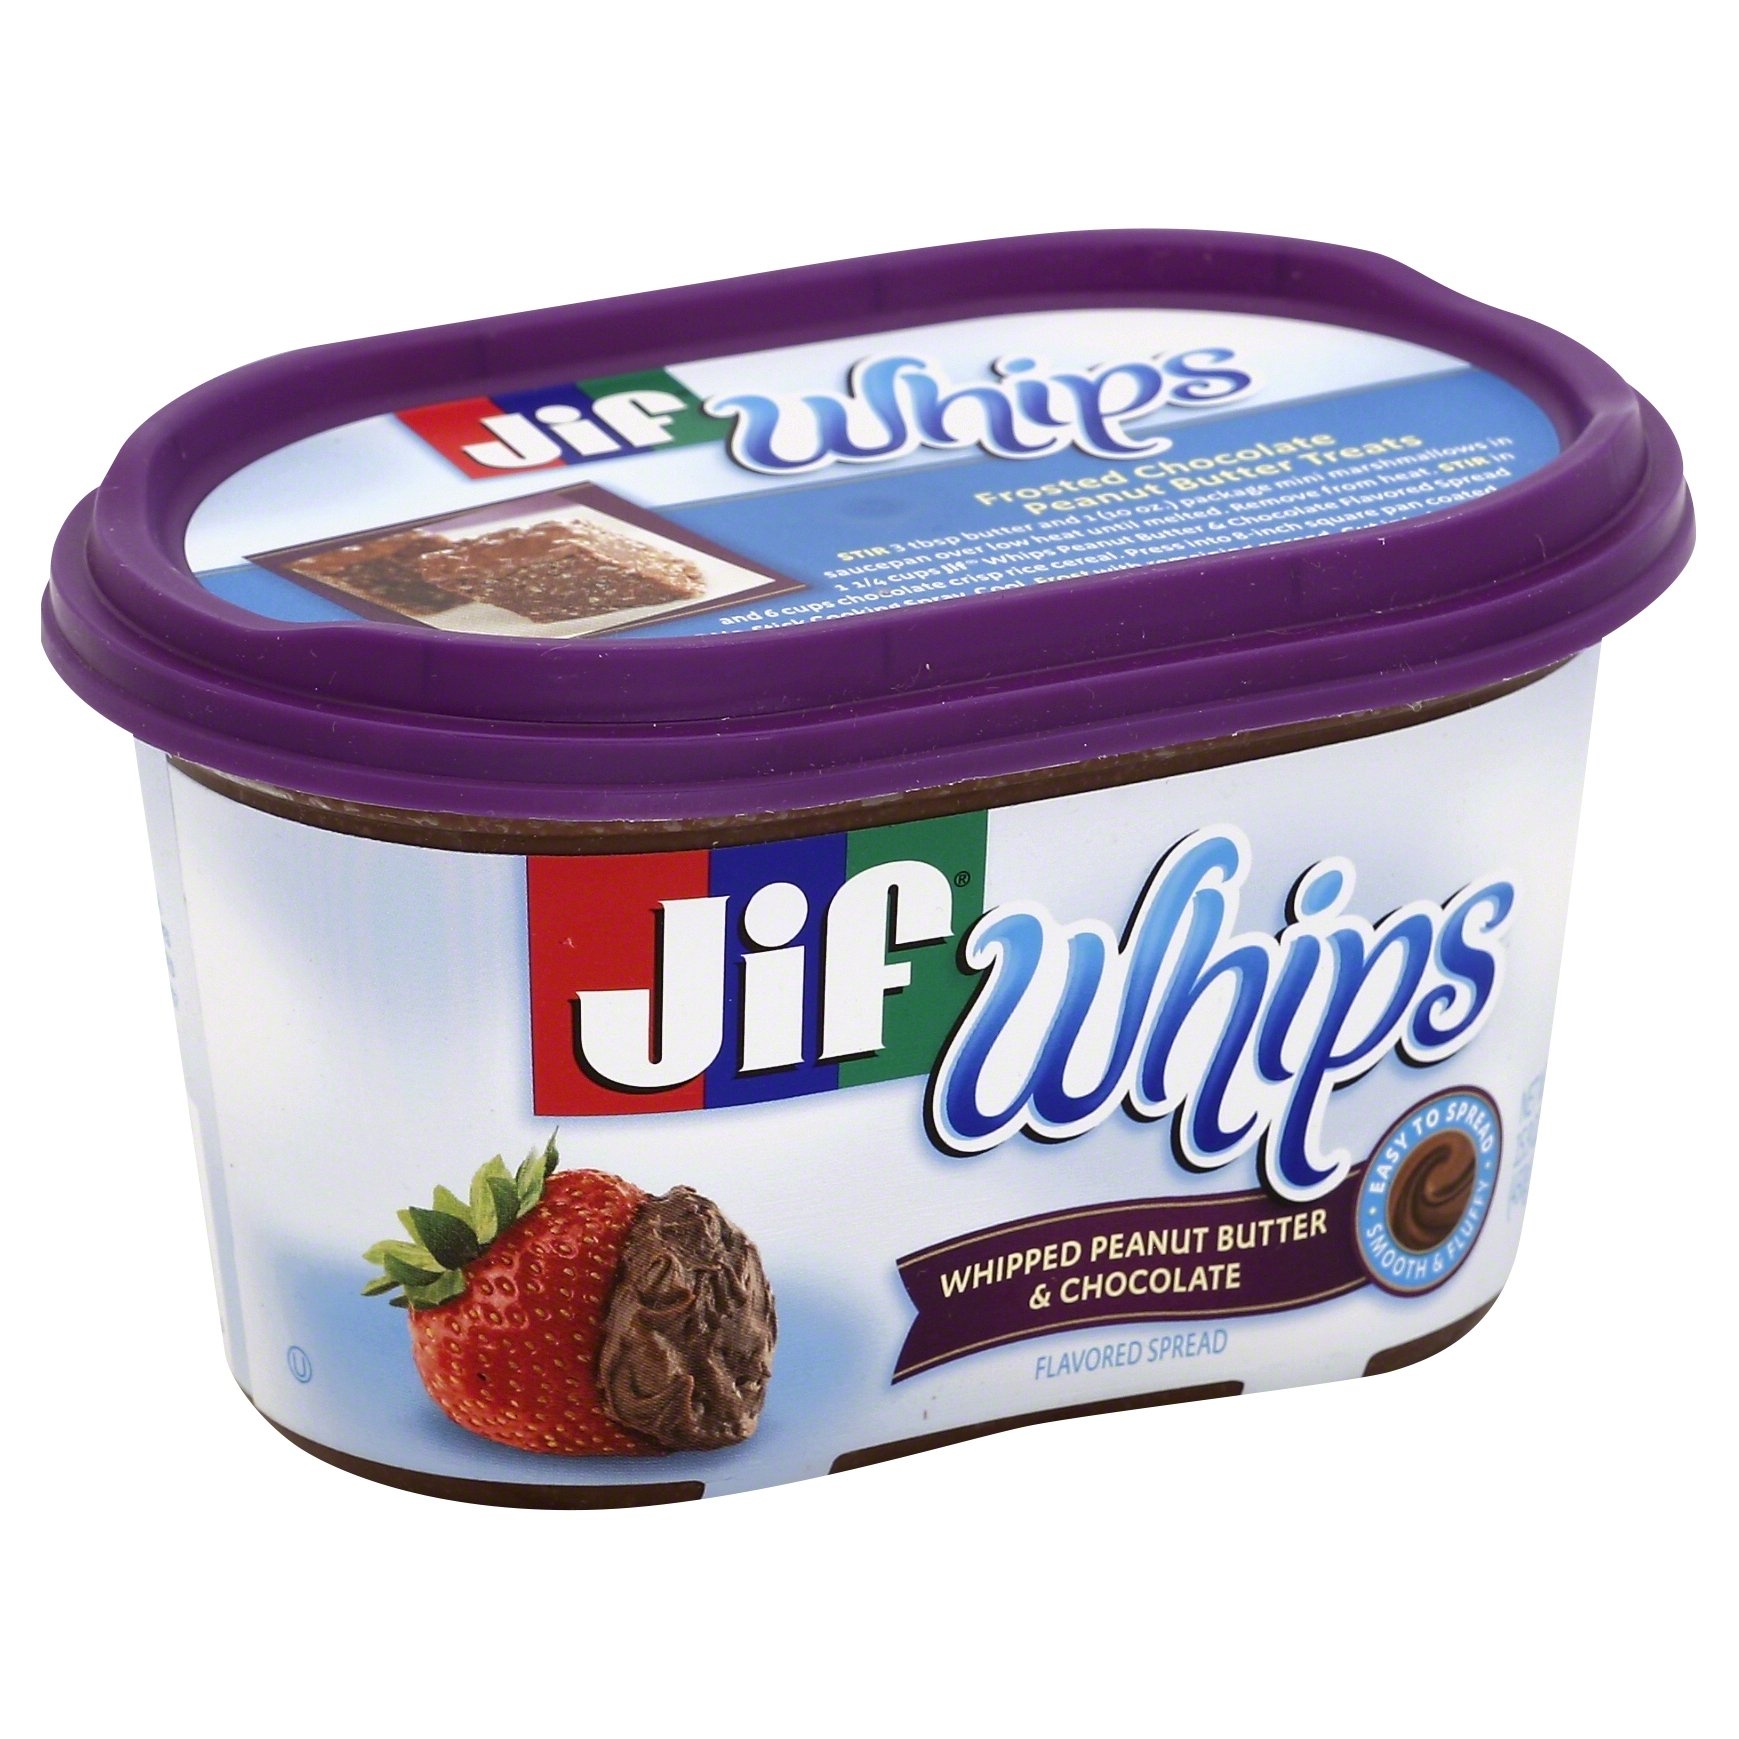 slide 1 of 6, Jif Whips Whipped Peanut Butter & Chocolate, 15.9 oz